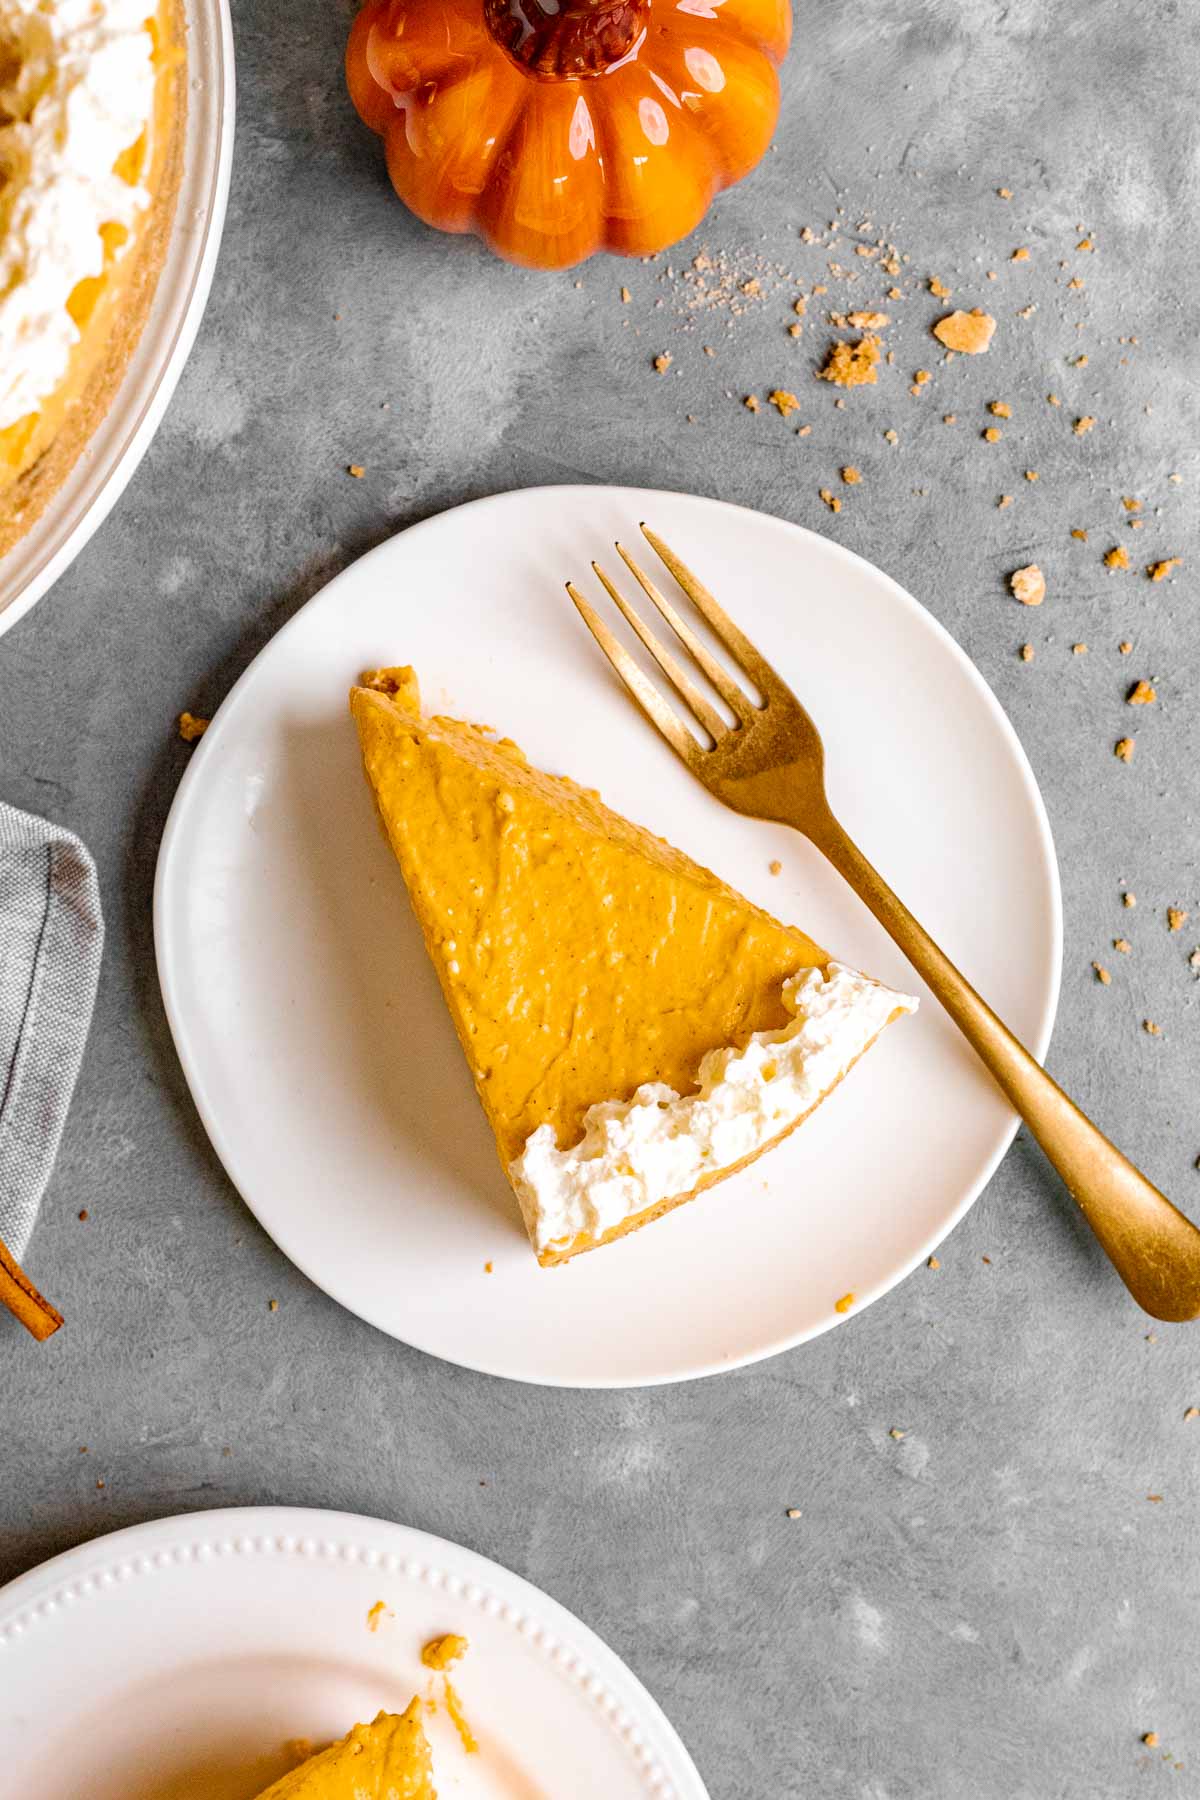 Slice of no-bake pumpkin cheesecake served on a plate.